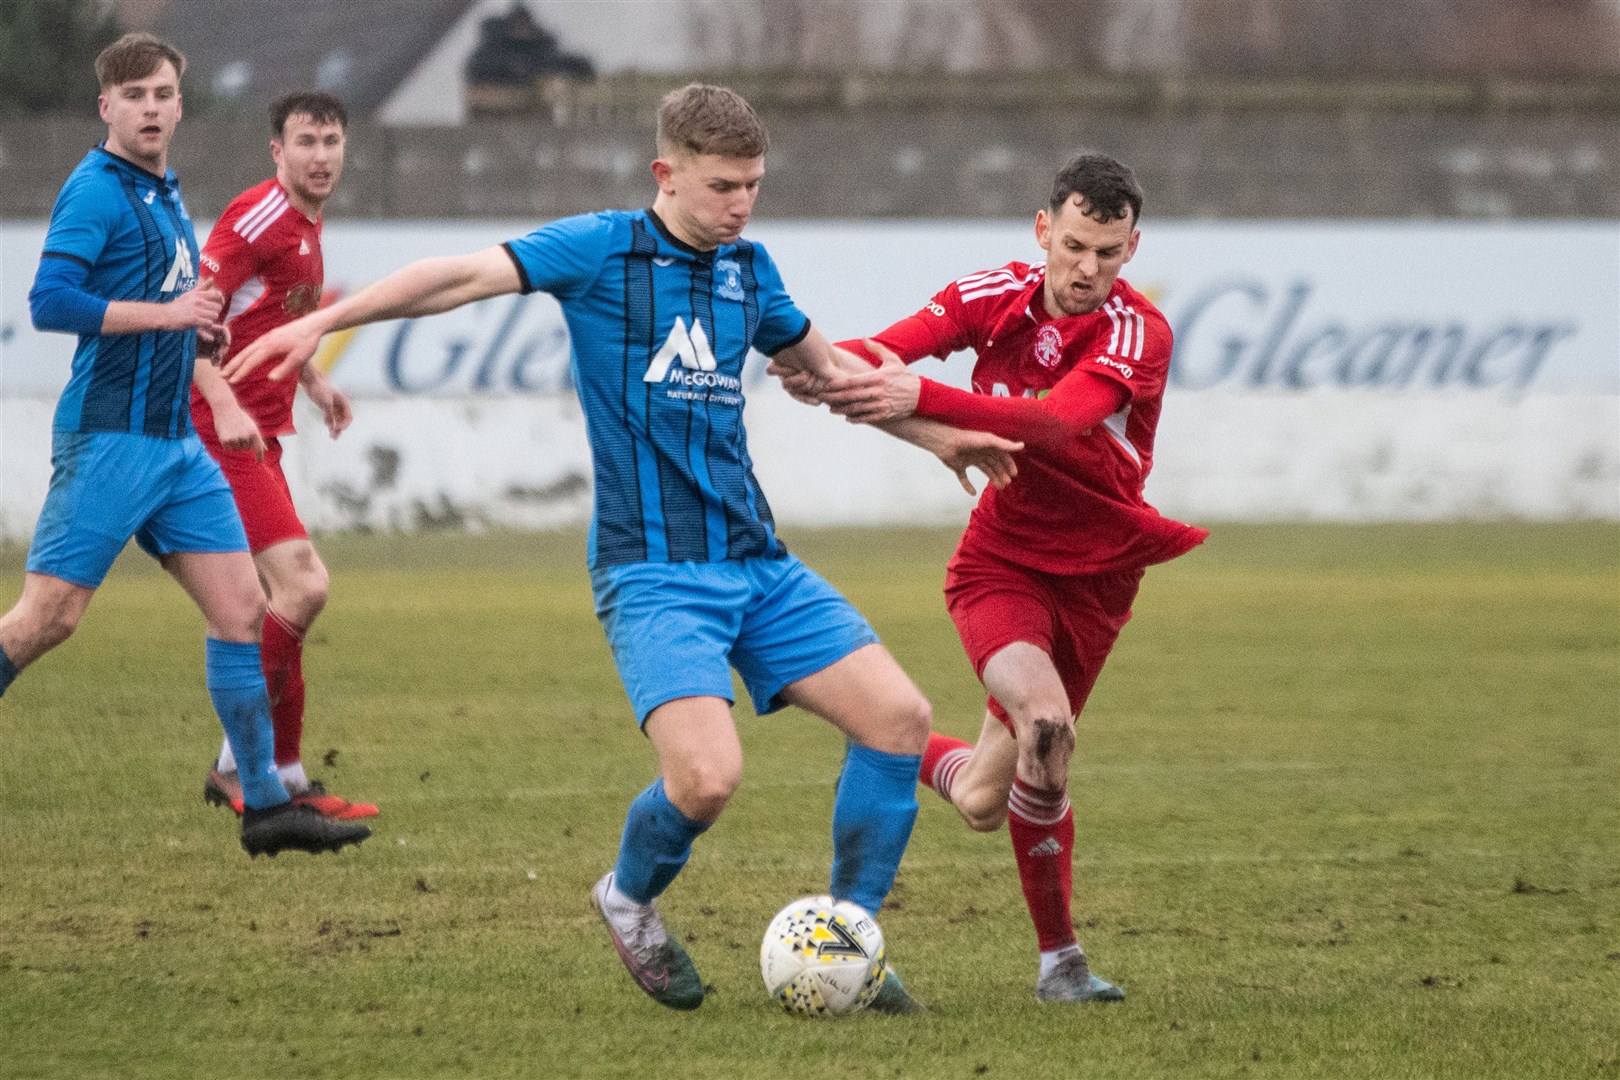 Lossie's Ryan Farquhar gets a grip on Strathspey's Jack Davison...Lossiemouth FC (2) vs Strathspey Thistle (1) - Highland Football League 23/24 - Grant Park, Lossie 10/02/2024...Picture: Daniel Forsyth..